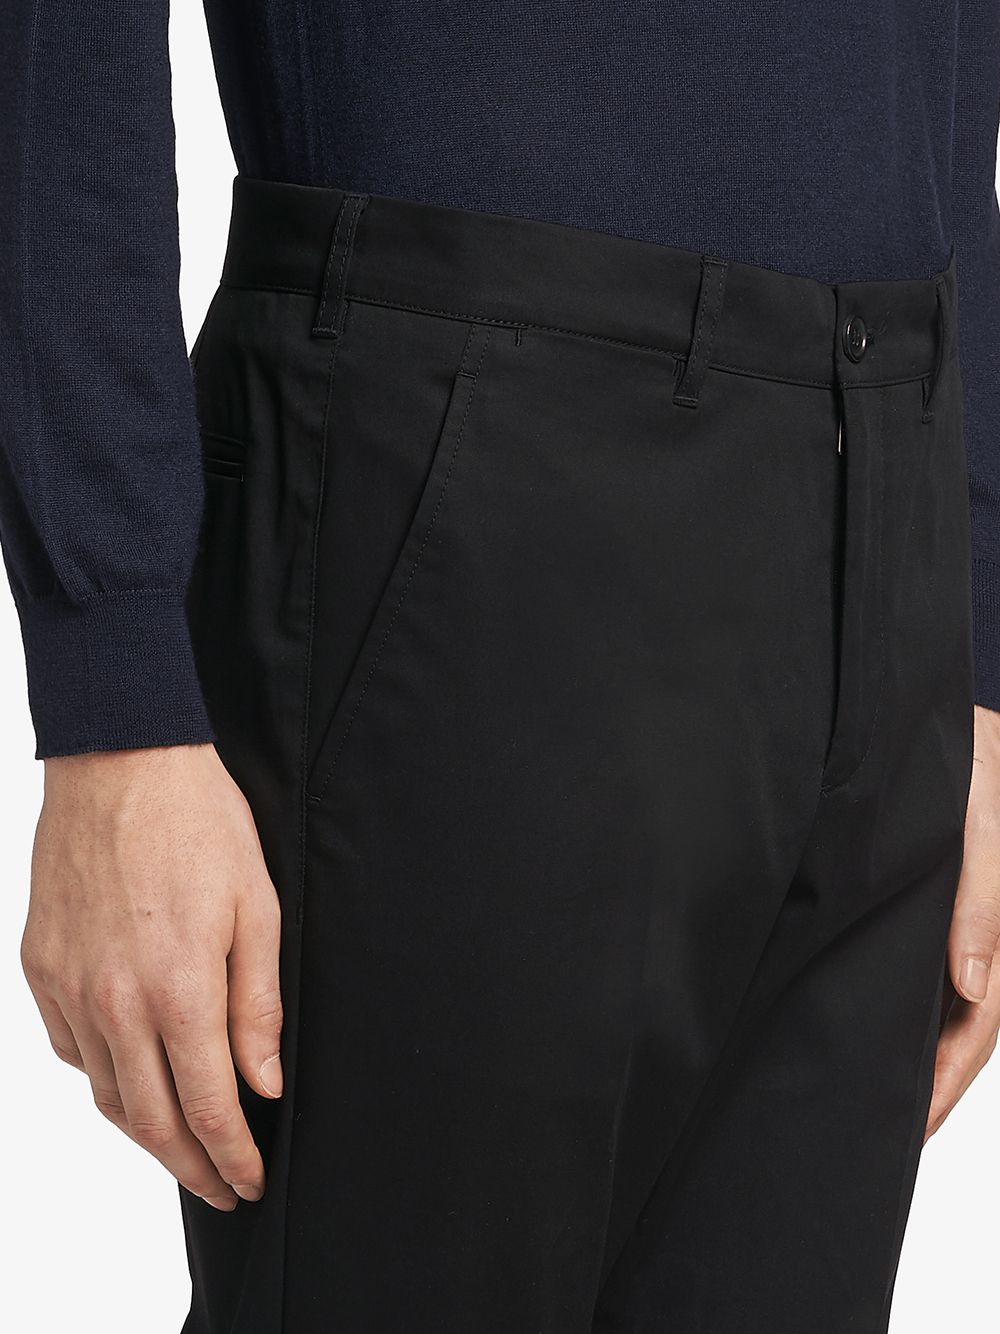 Shop Prada tailored gabardine trousers with Express Delivery - FARFETCH